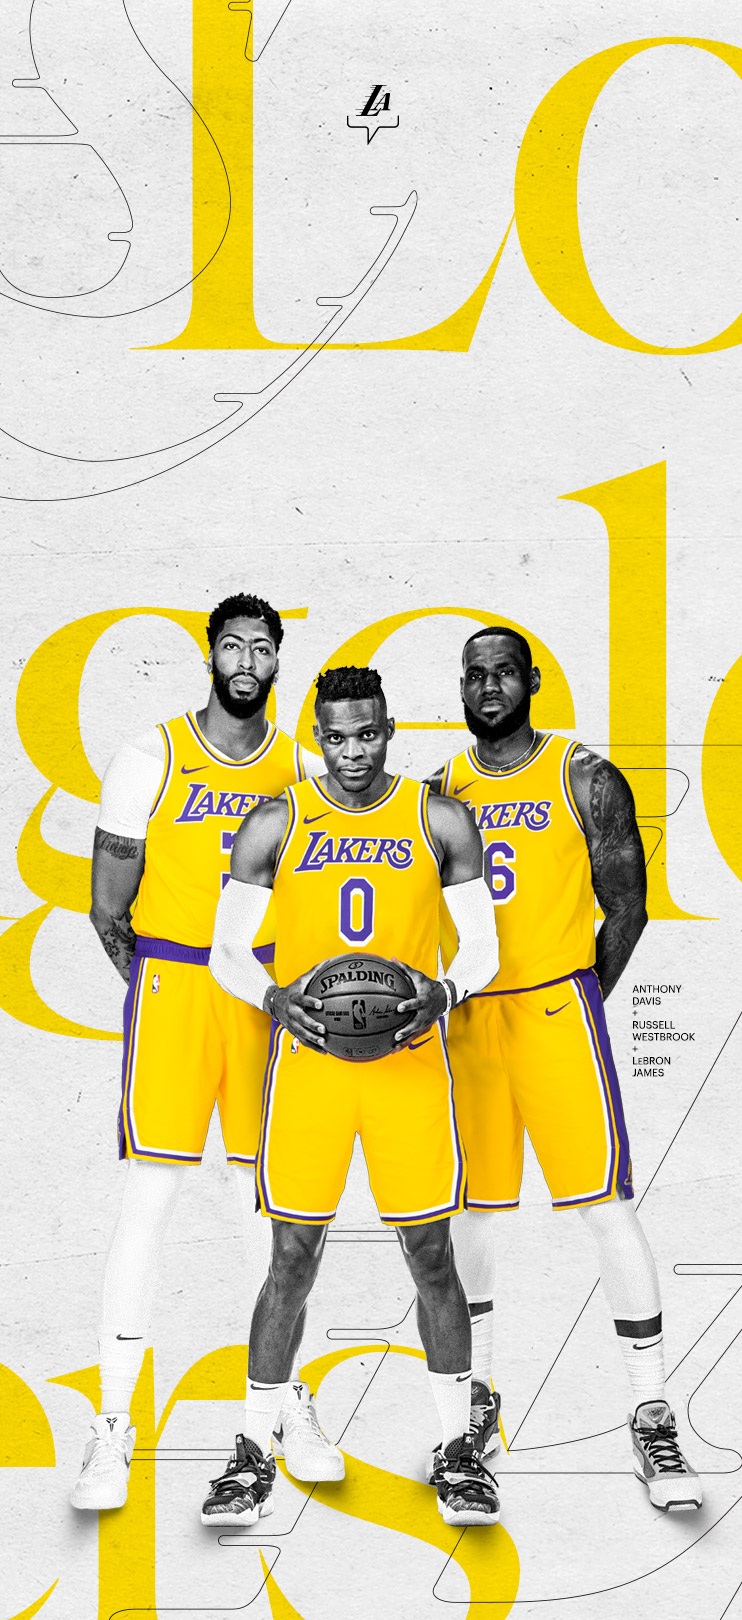 Los Angeles Lakers a new member in the Wallpaper Wednesday mix